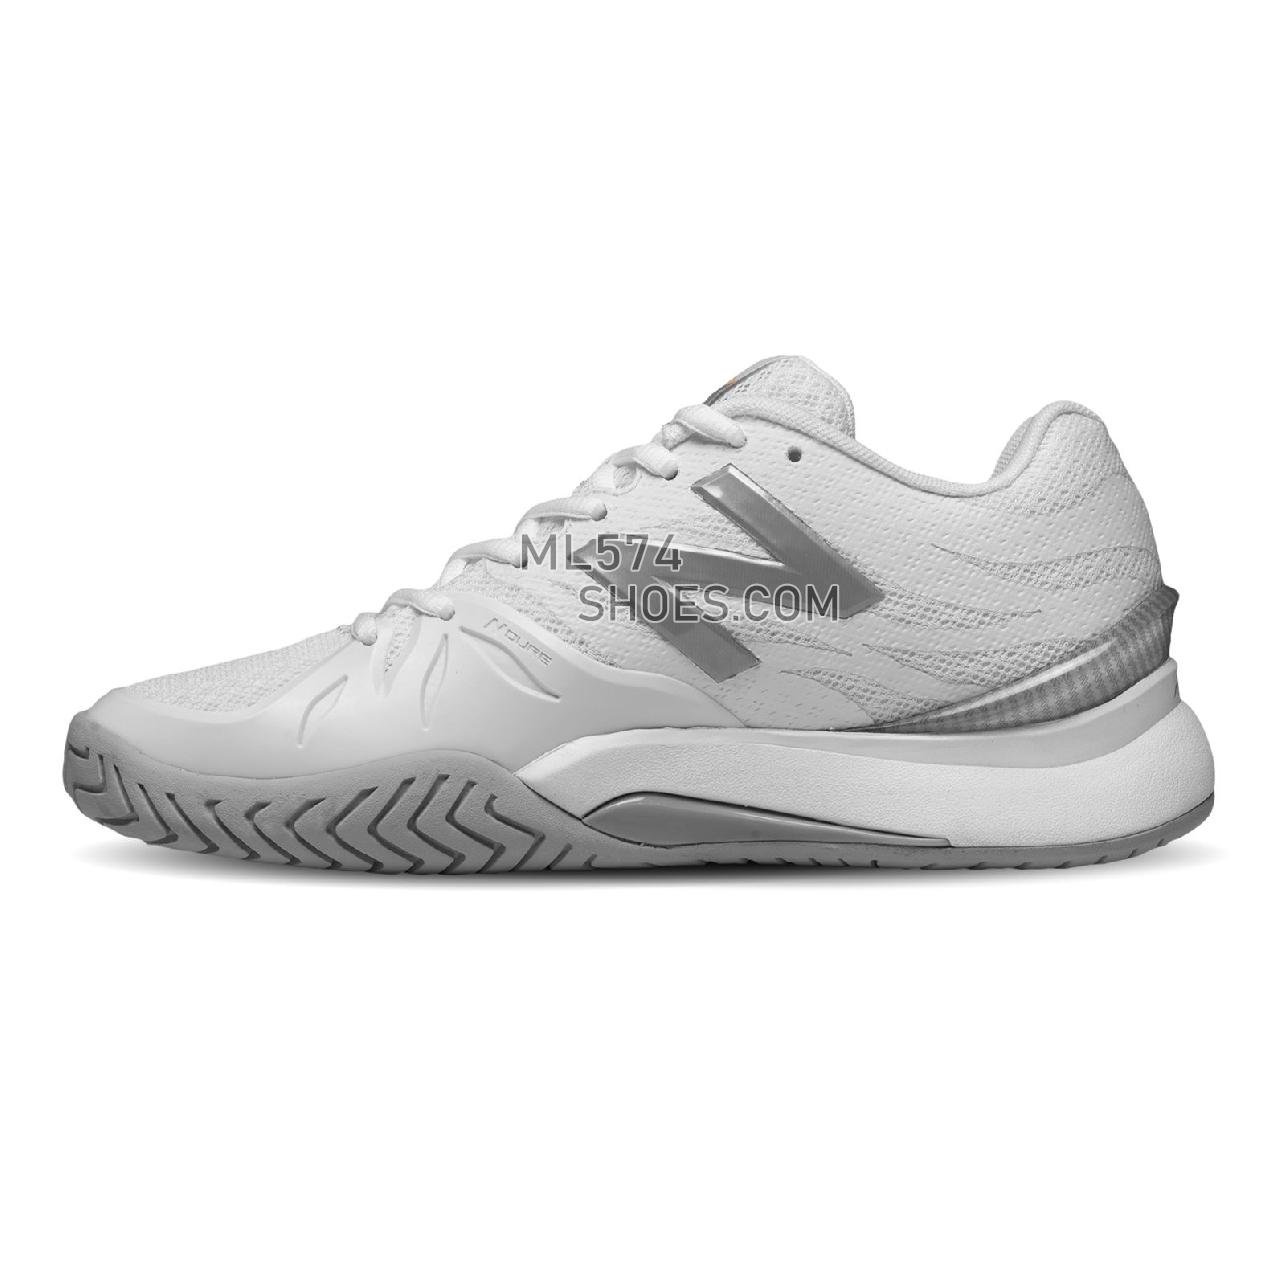 New Balance 1296v2 - Women's 1296 - Tennis / Court White with Icarus - WC1296W2